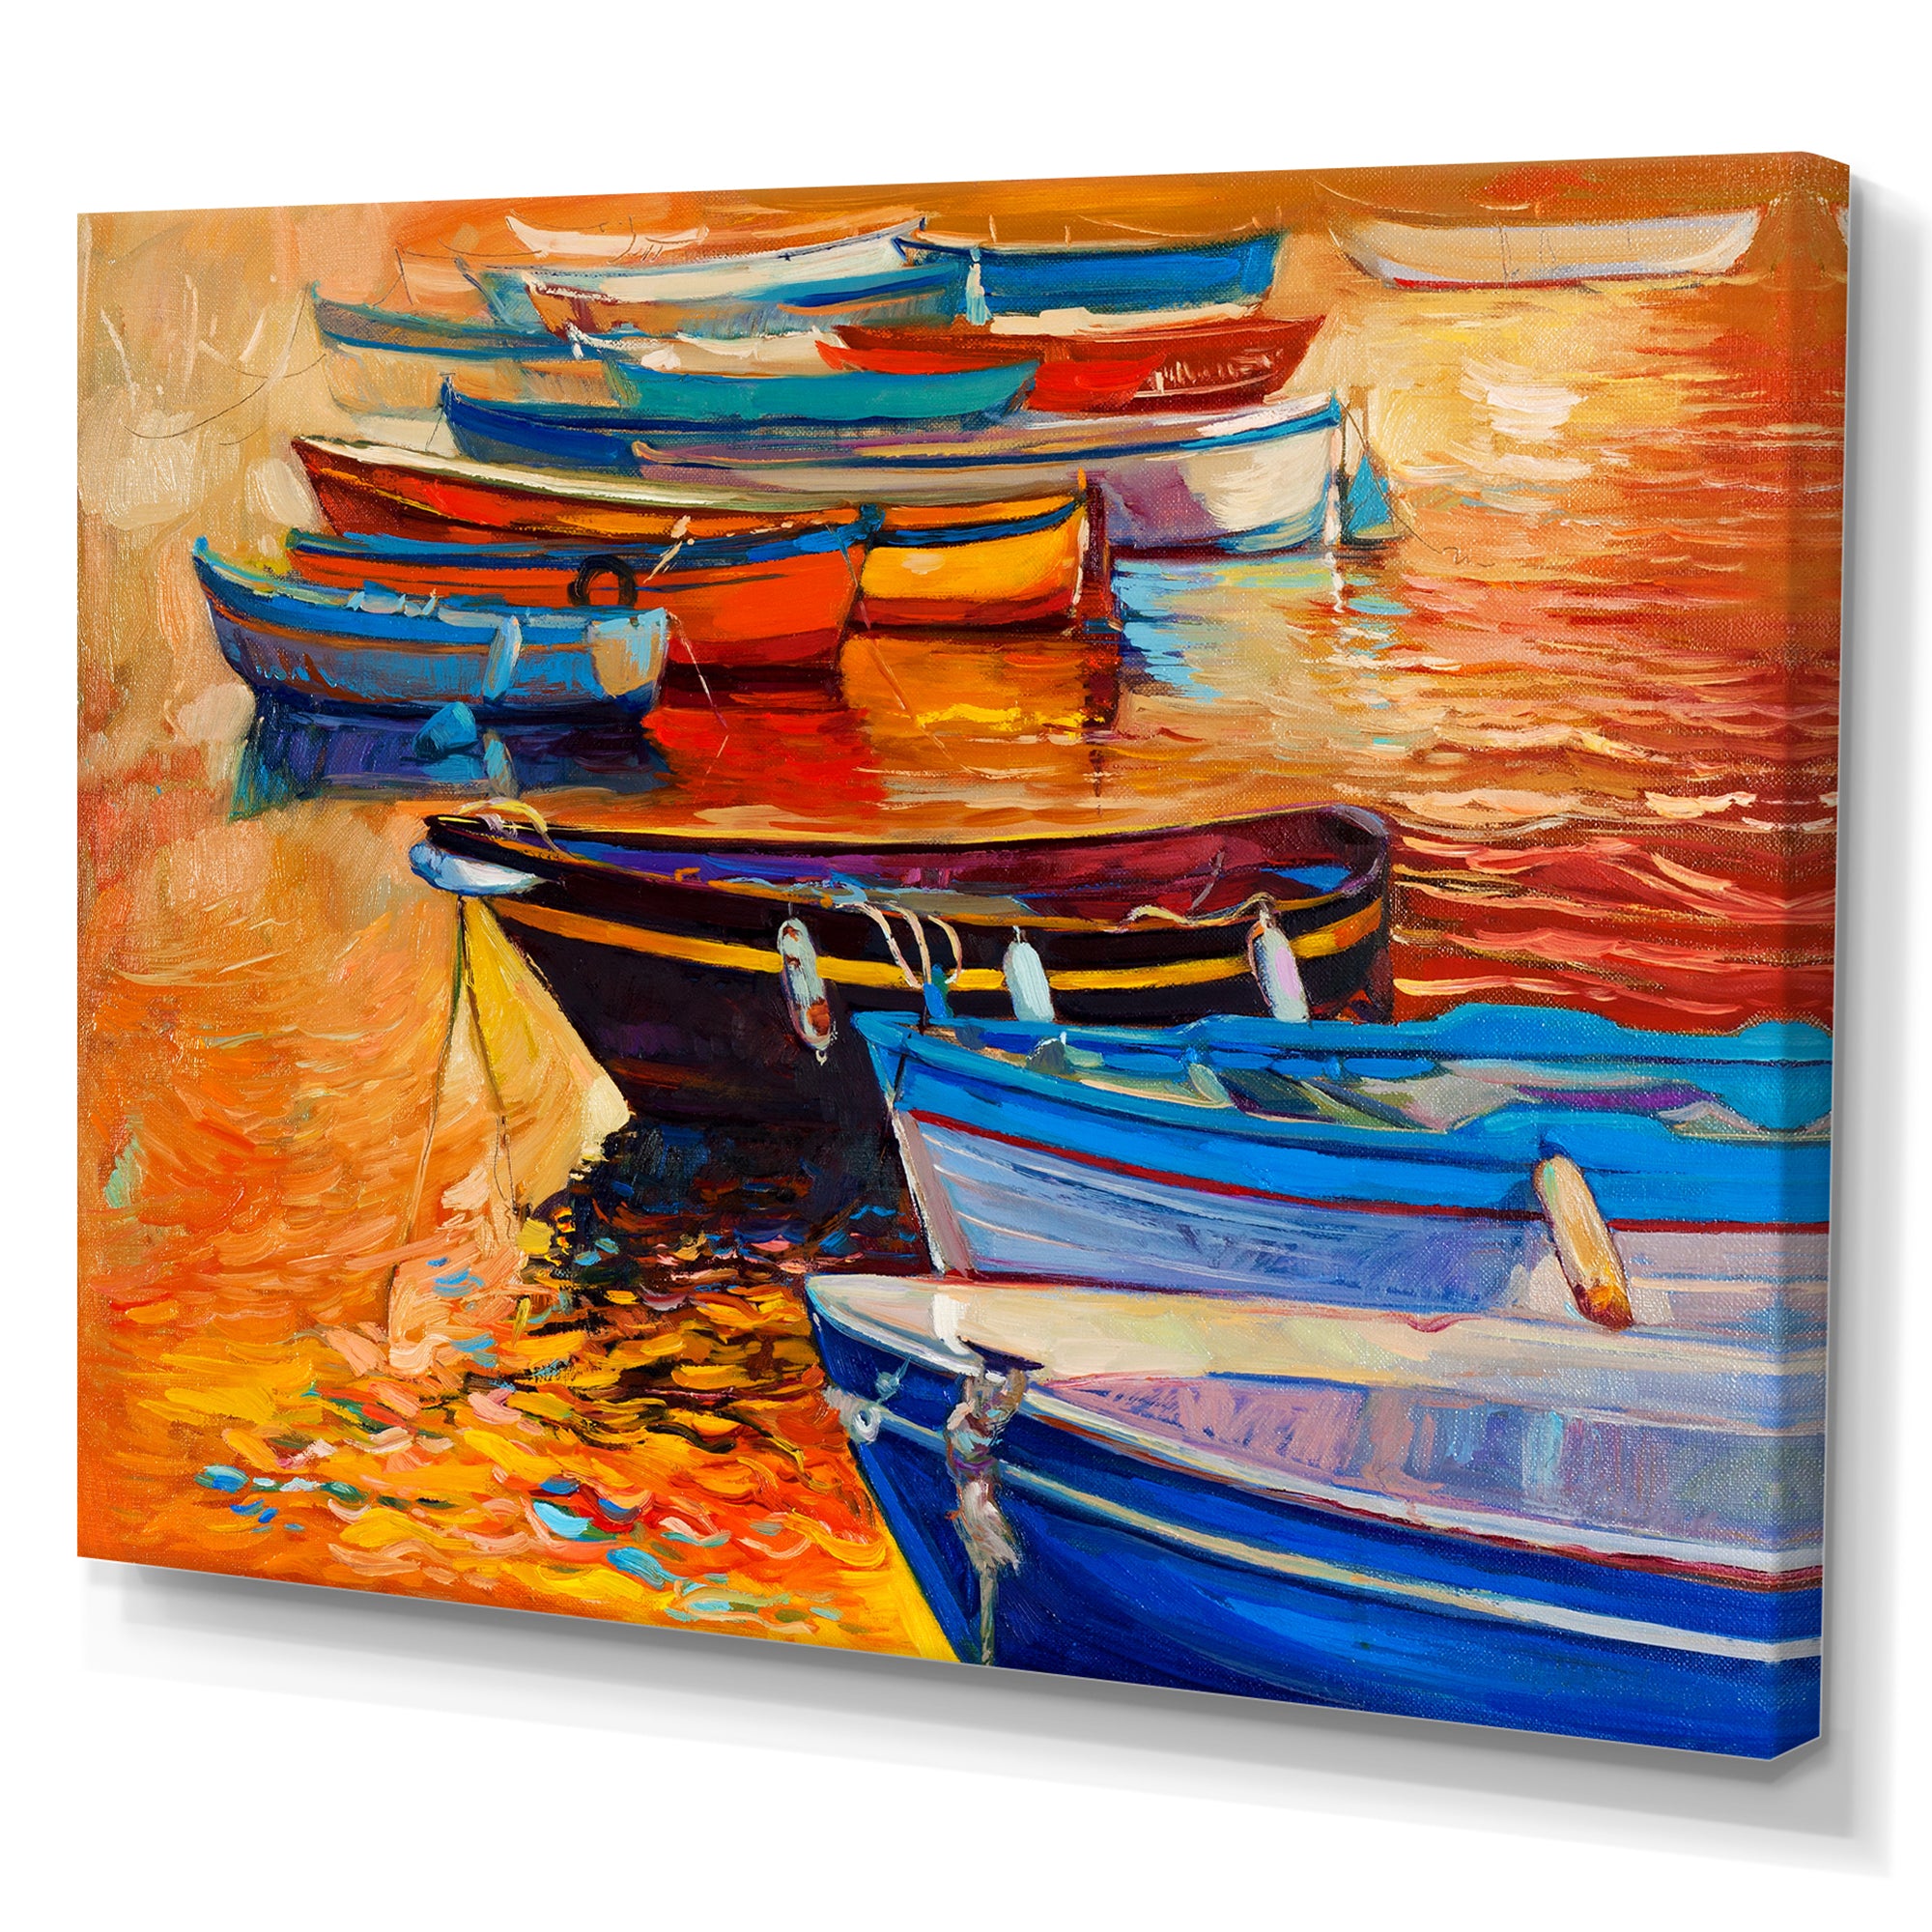 Boats In The Harbor During Warm Colourd Sunset I